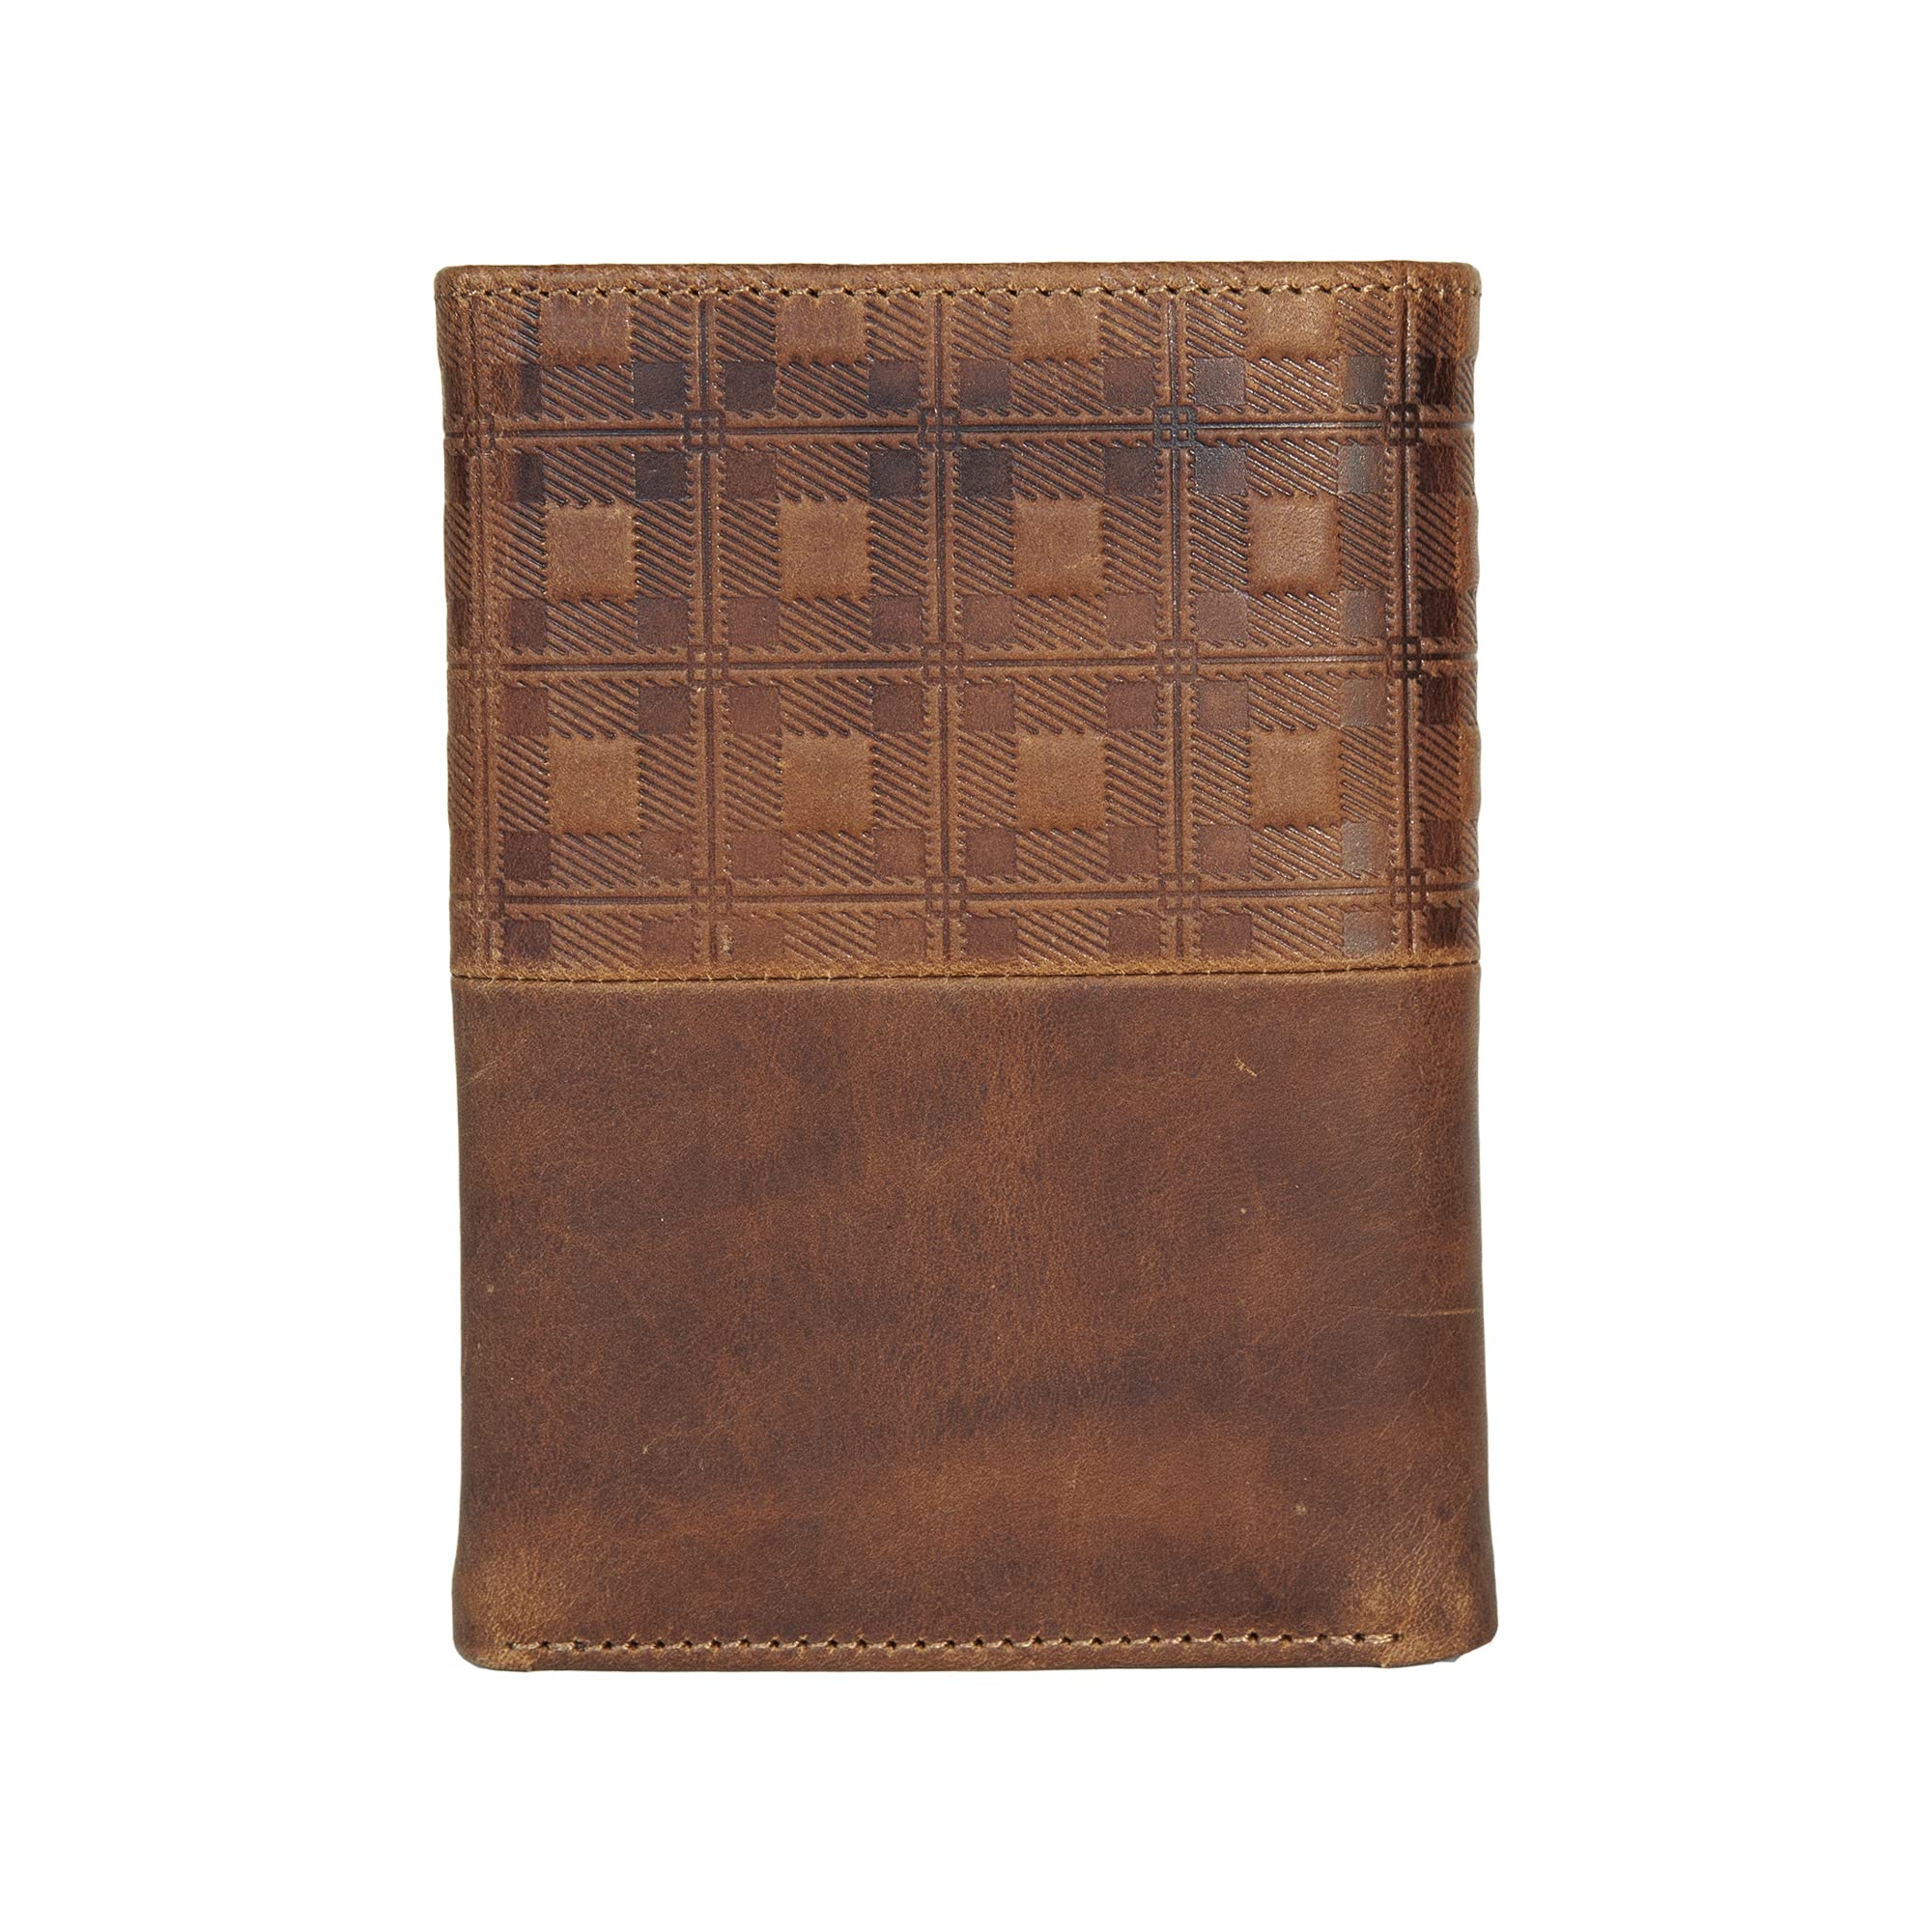 Nautica Men's Embossed Leather Card Case, Brown, OSFA